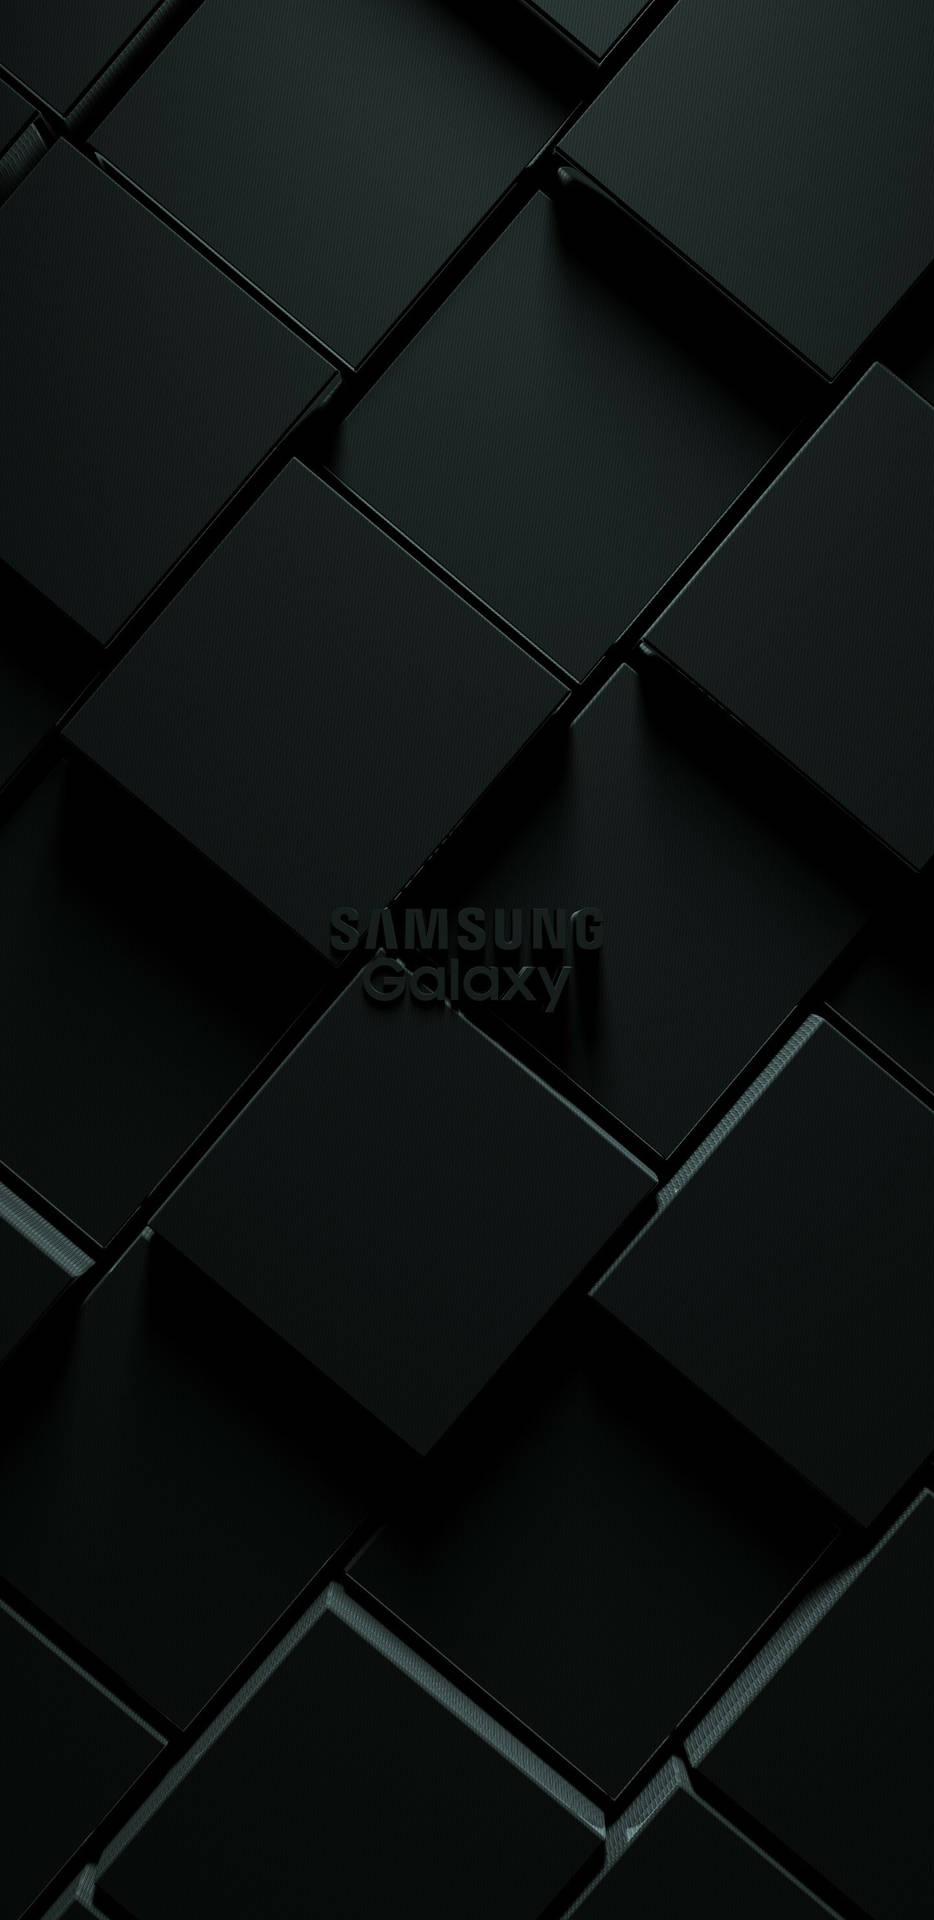 Samsung Galaxy 3d Dark Aesthetic Cubes Picture